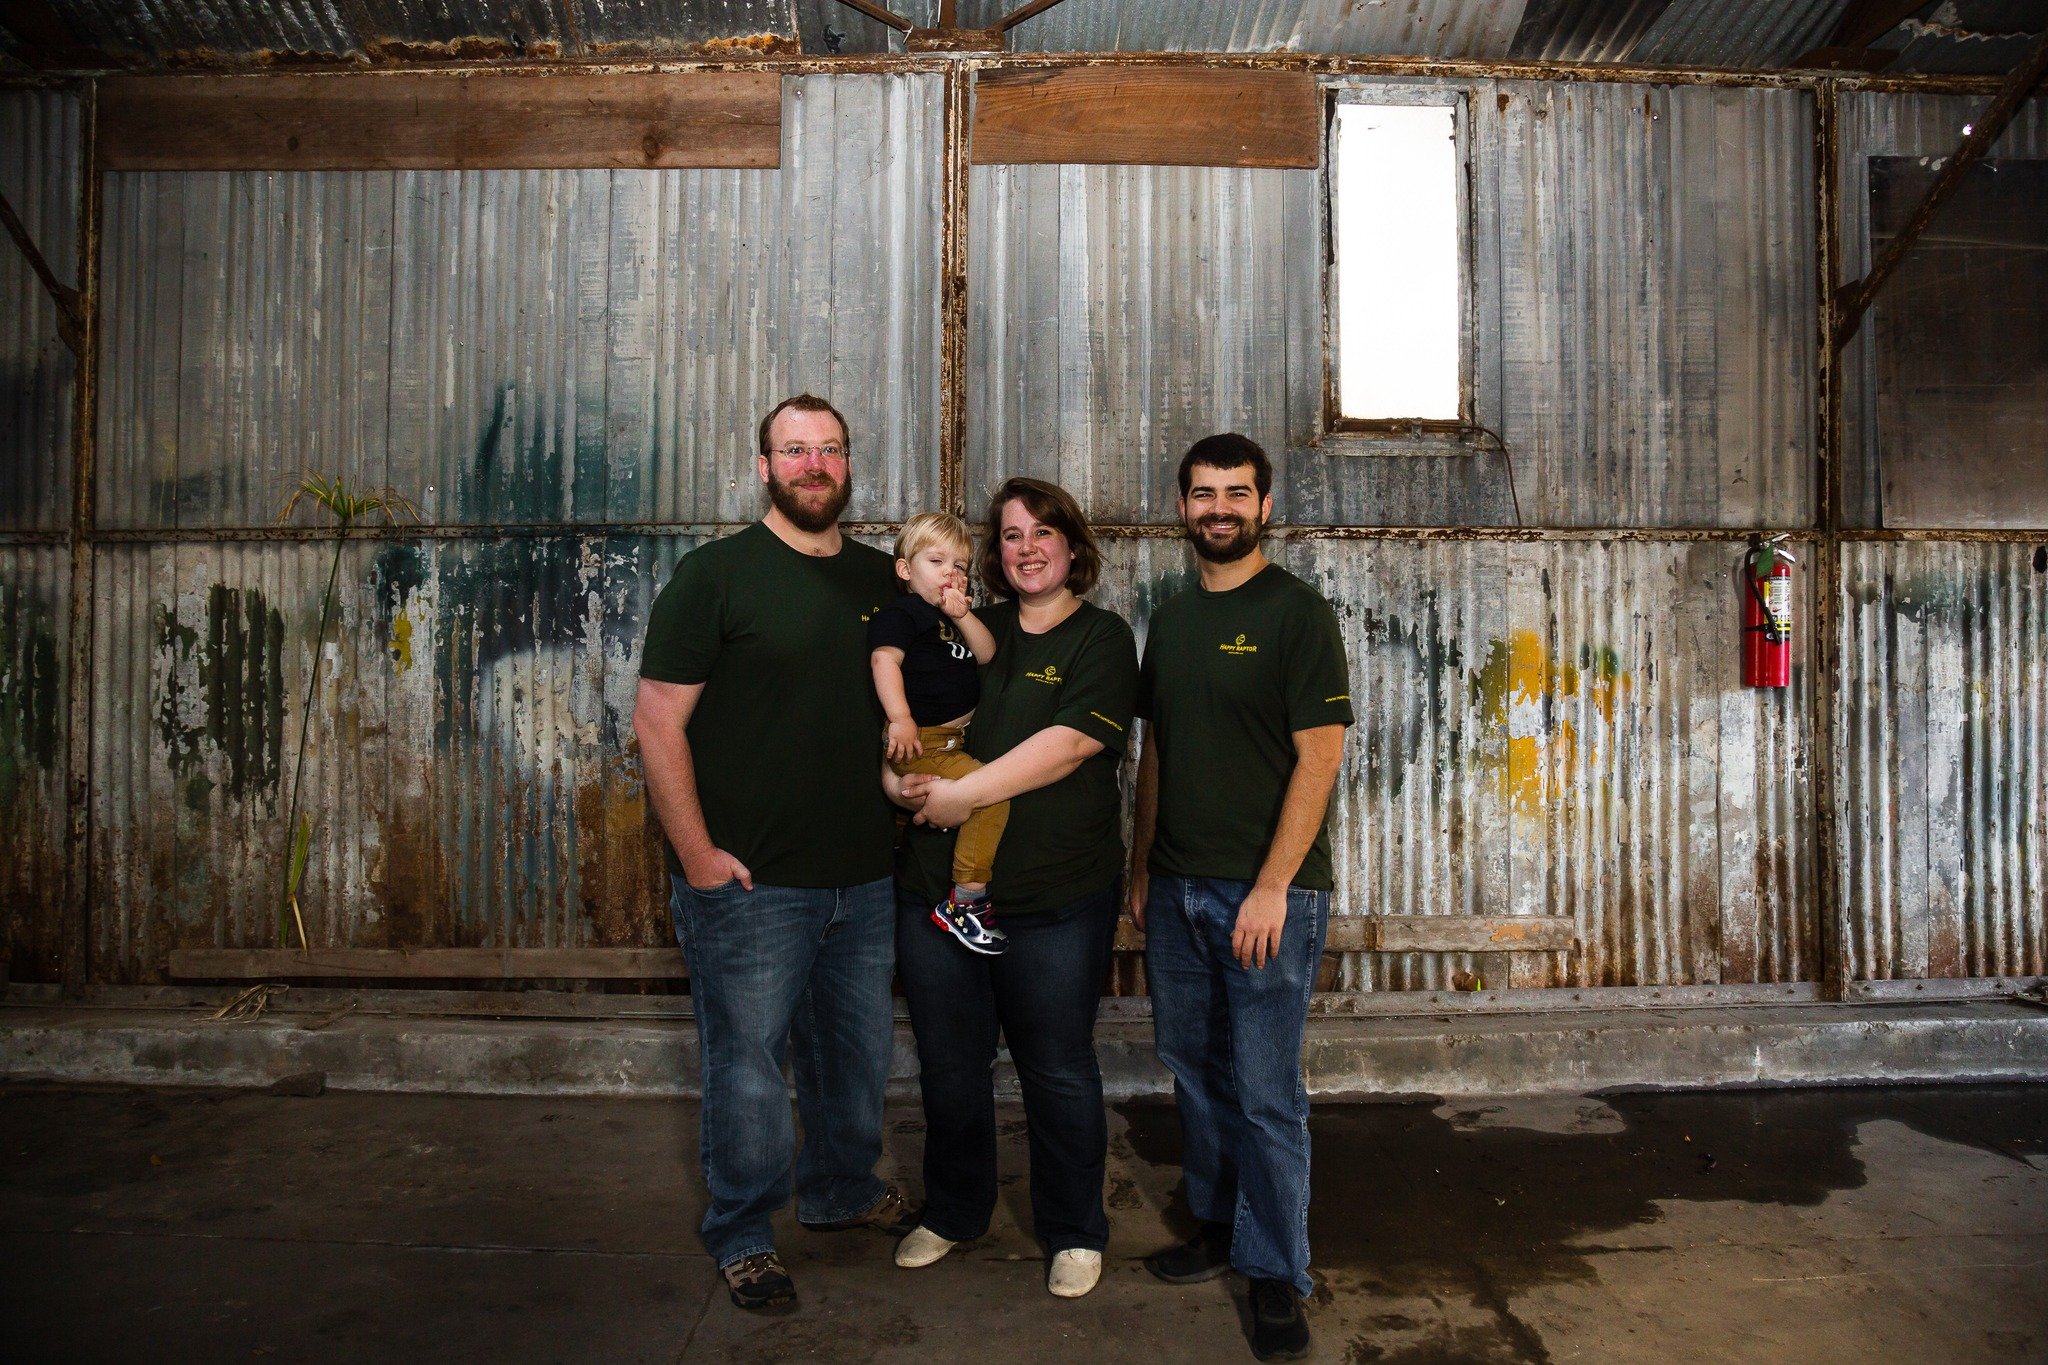 Dear friends, 

We are so sorry to share with you that on Friday, May 17th, Happy Raptor Distilling will close its doors for good. We will miss you so much. 

We are devastated and exhausted, but deeply proud. Since 2020, Happy Raptor has contributed